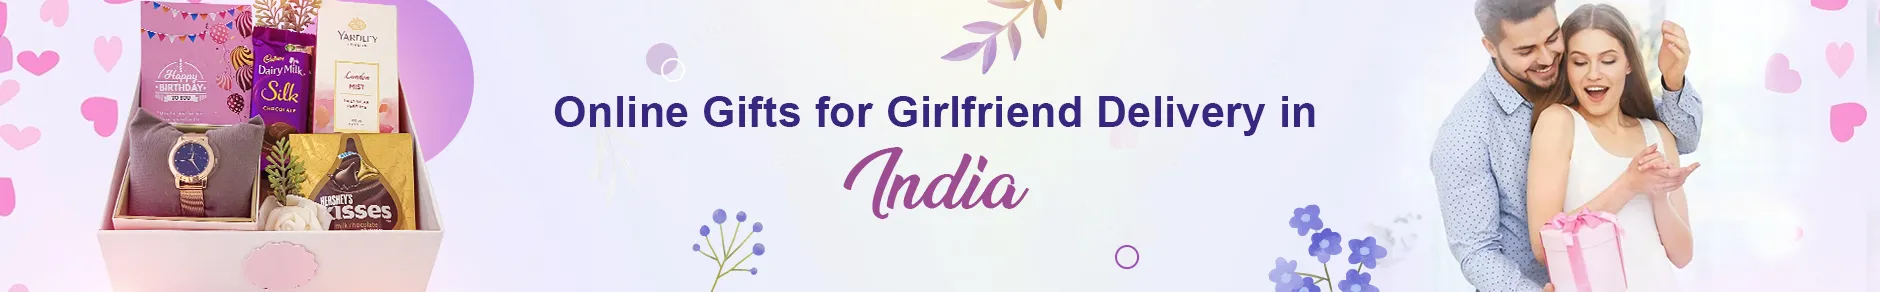 Gifts for Girlfriend to India